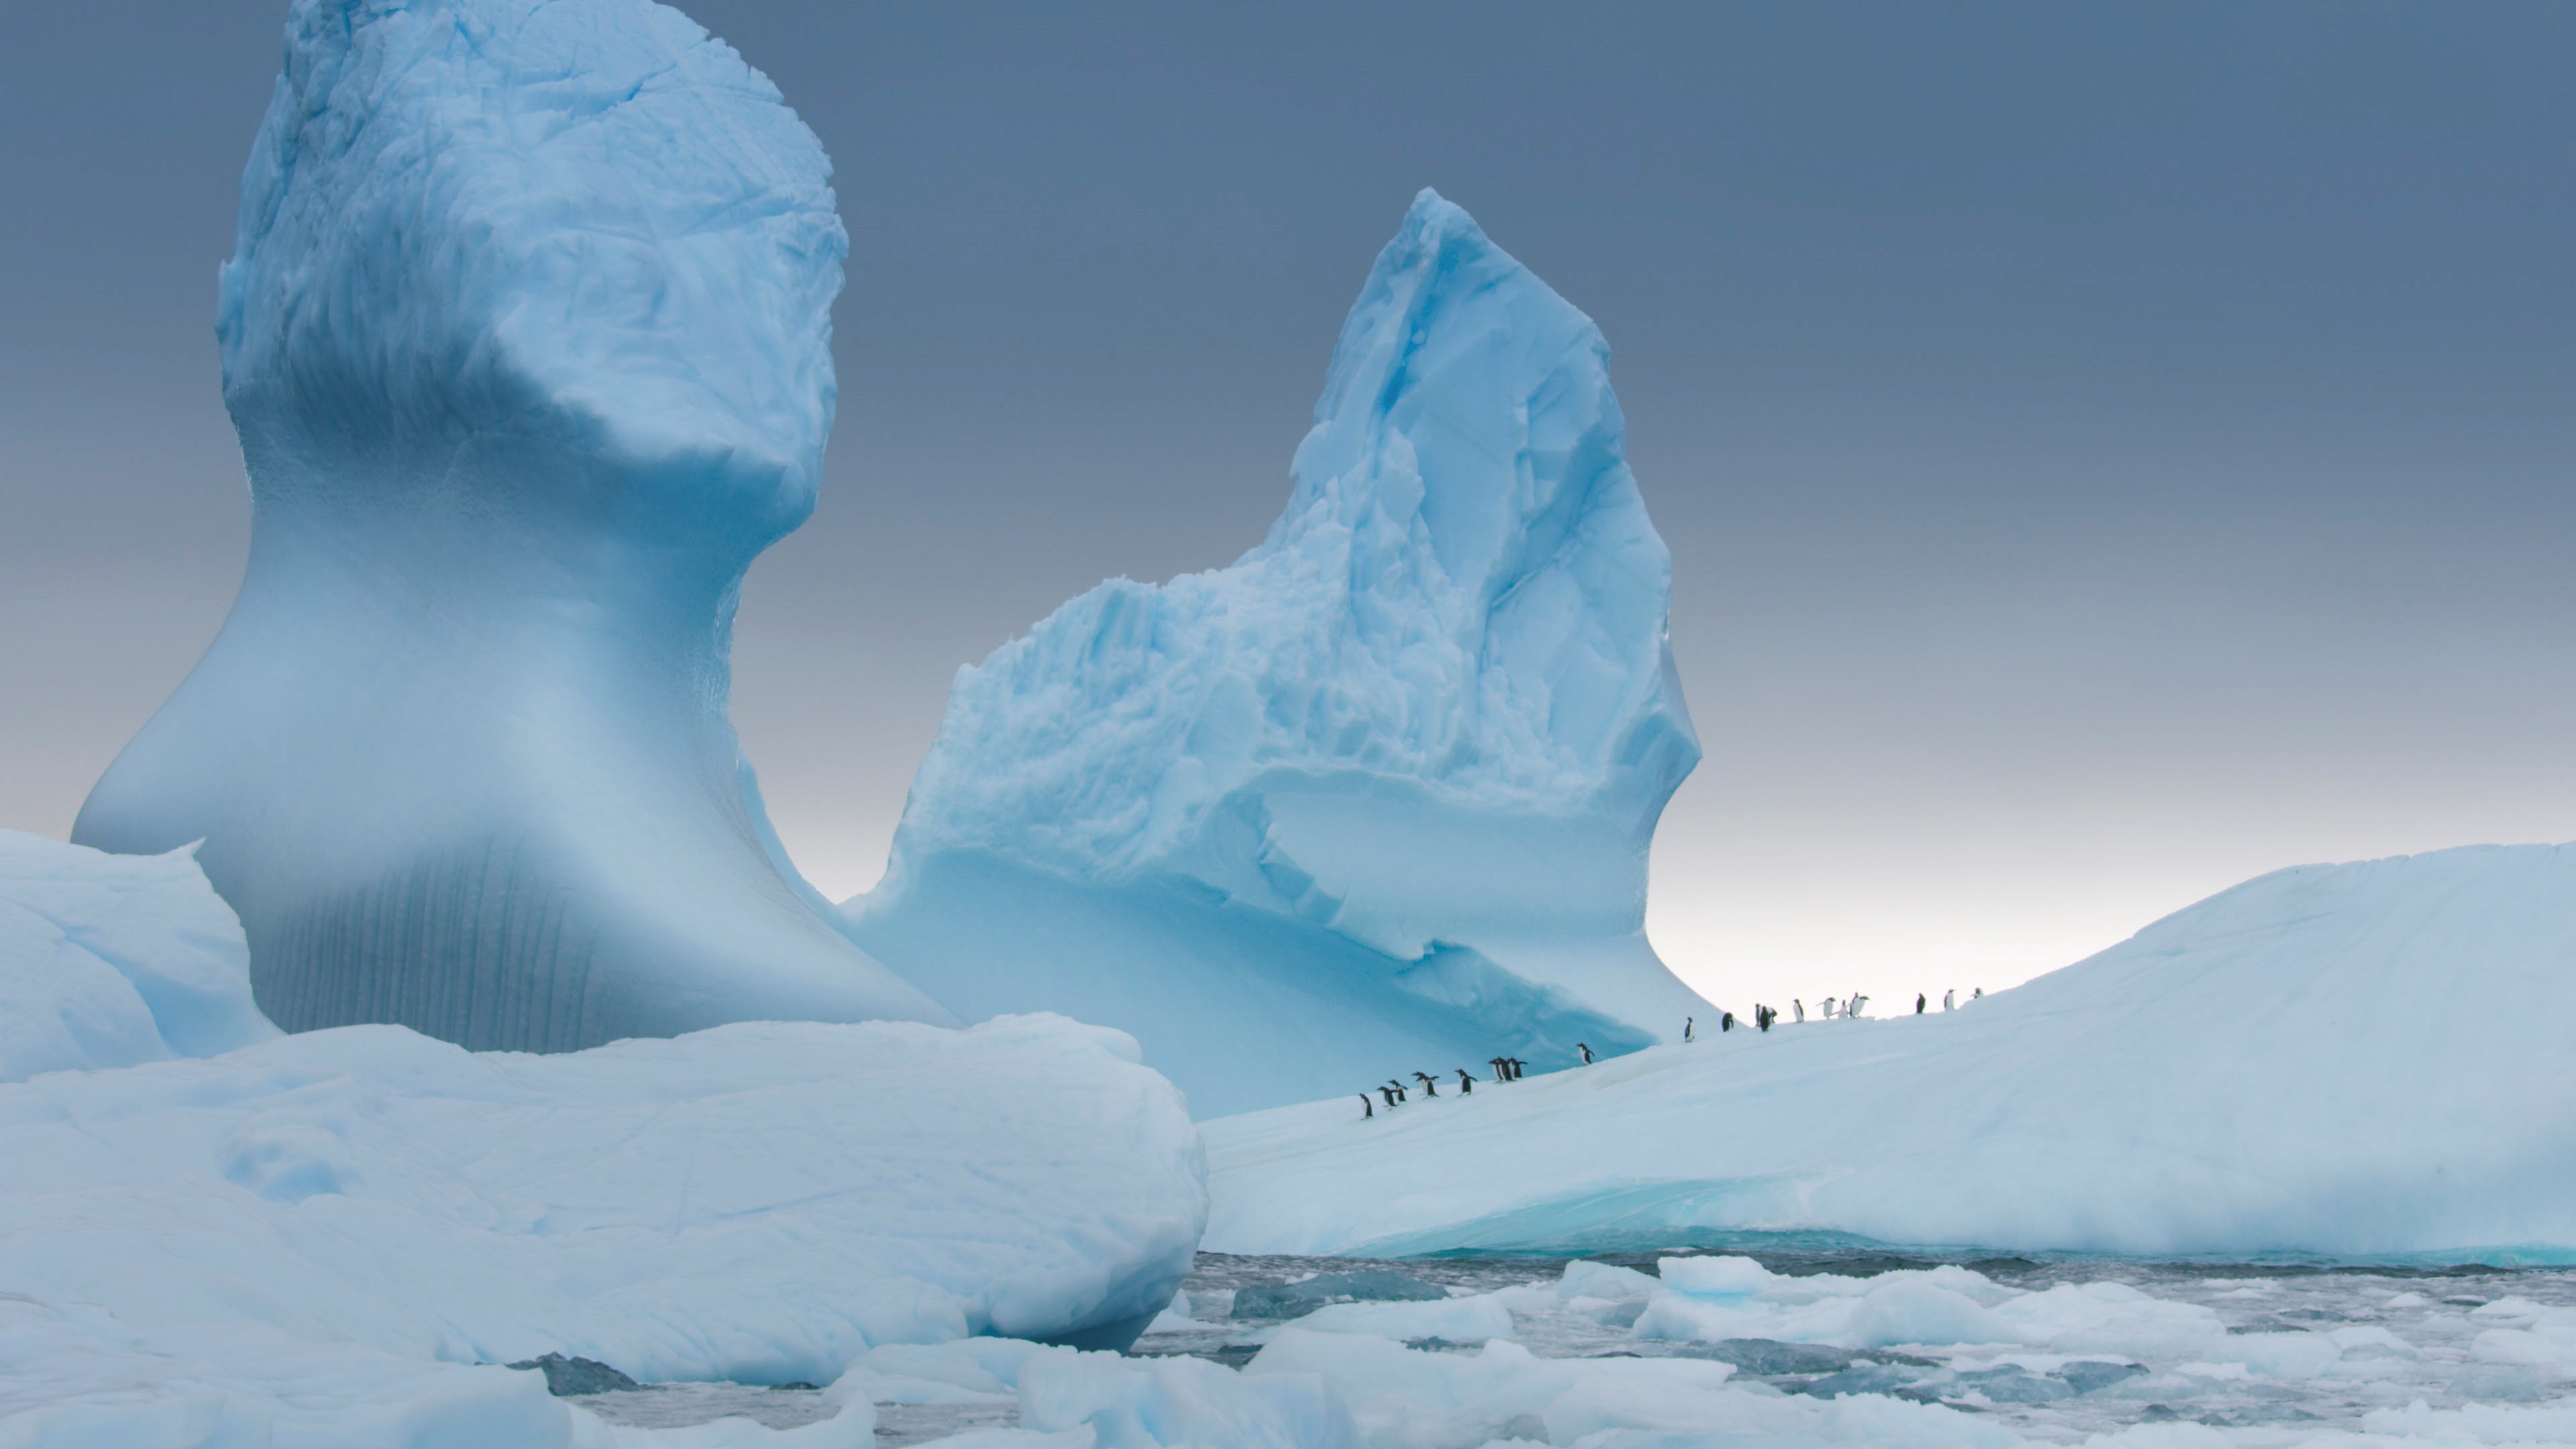 Gentoo penguins gather on an iceberg before heading out to sea to feed in the Antarctica episode of Seven Worlds, One Planet 